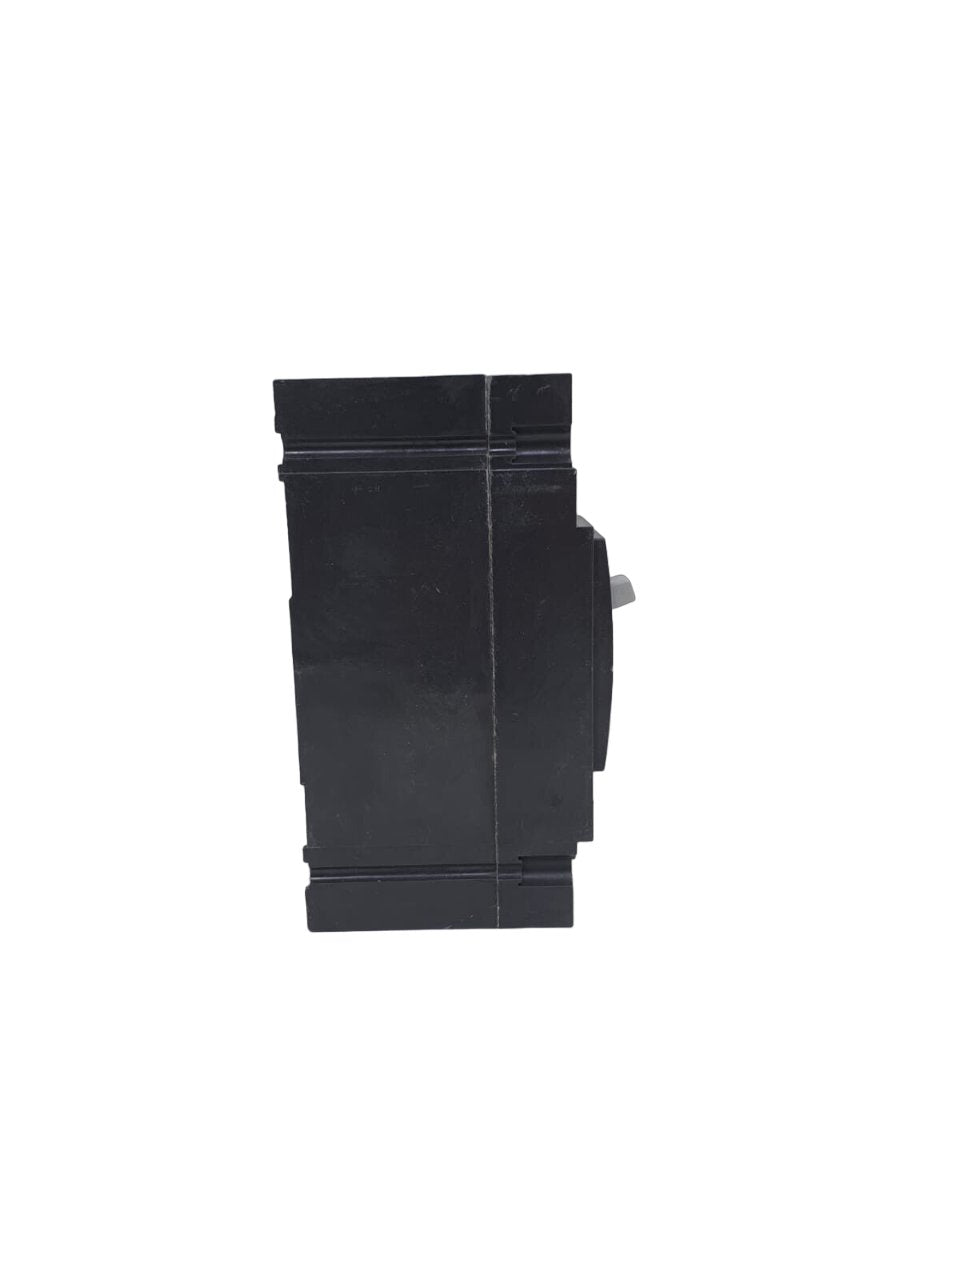 THED113025WL - General Electrics - Molded Case Circuit Breakers